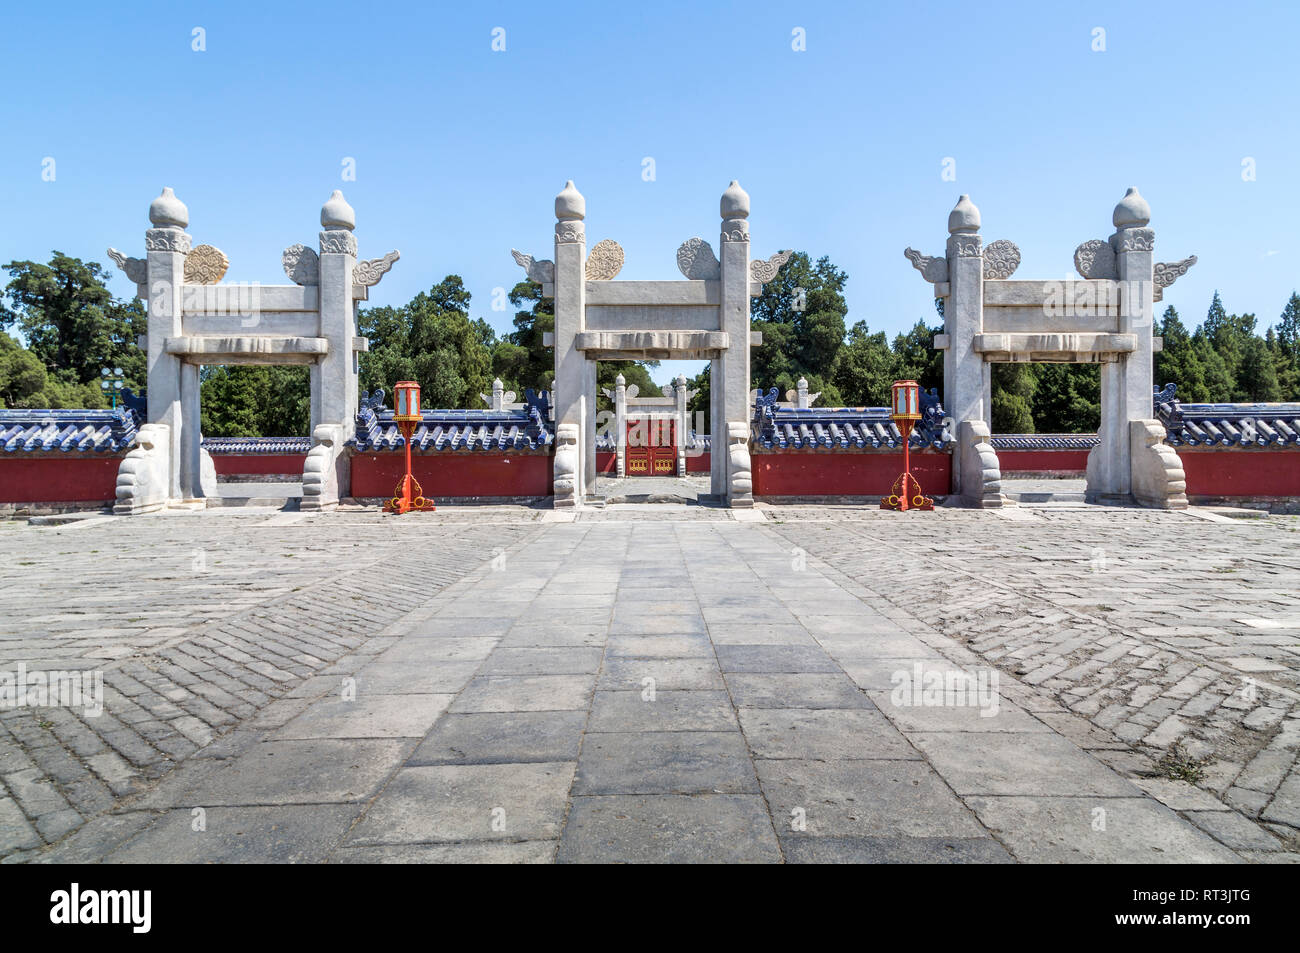 Linxing Gate of the Circular Mound Altar shown without any people in the shot. Three white marble gates stand out  amid the red walls and blue tiles. Stock Photo